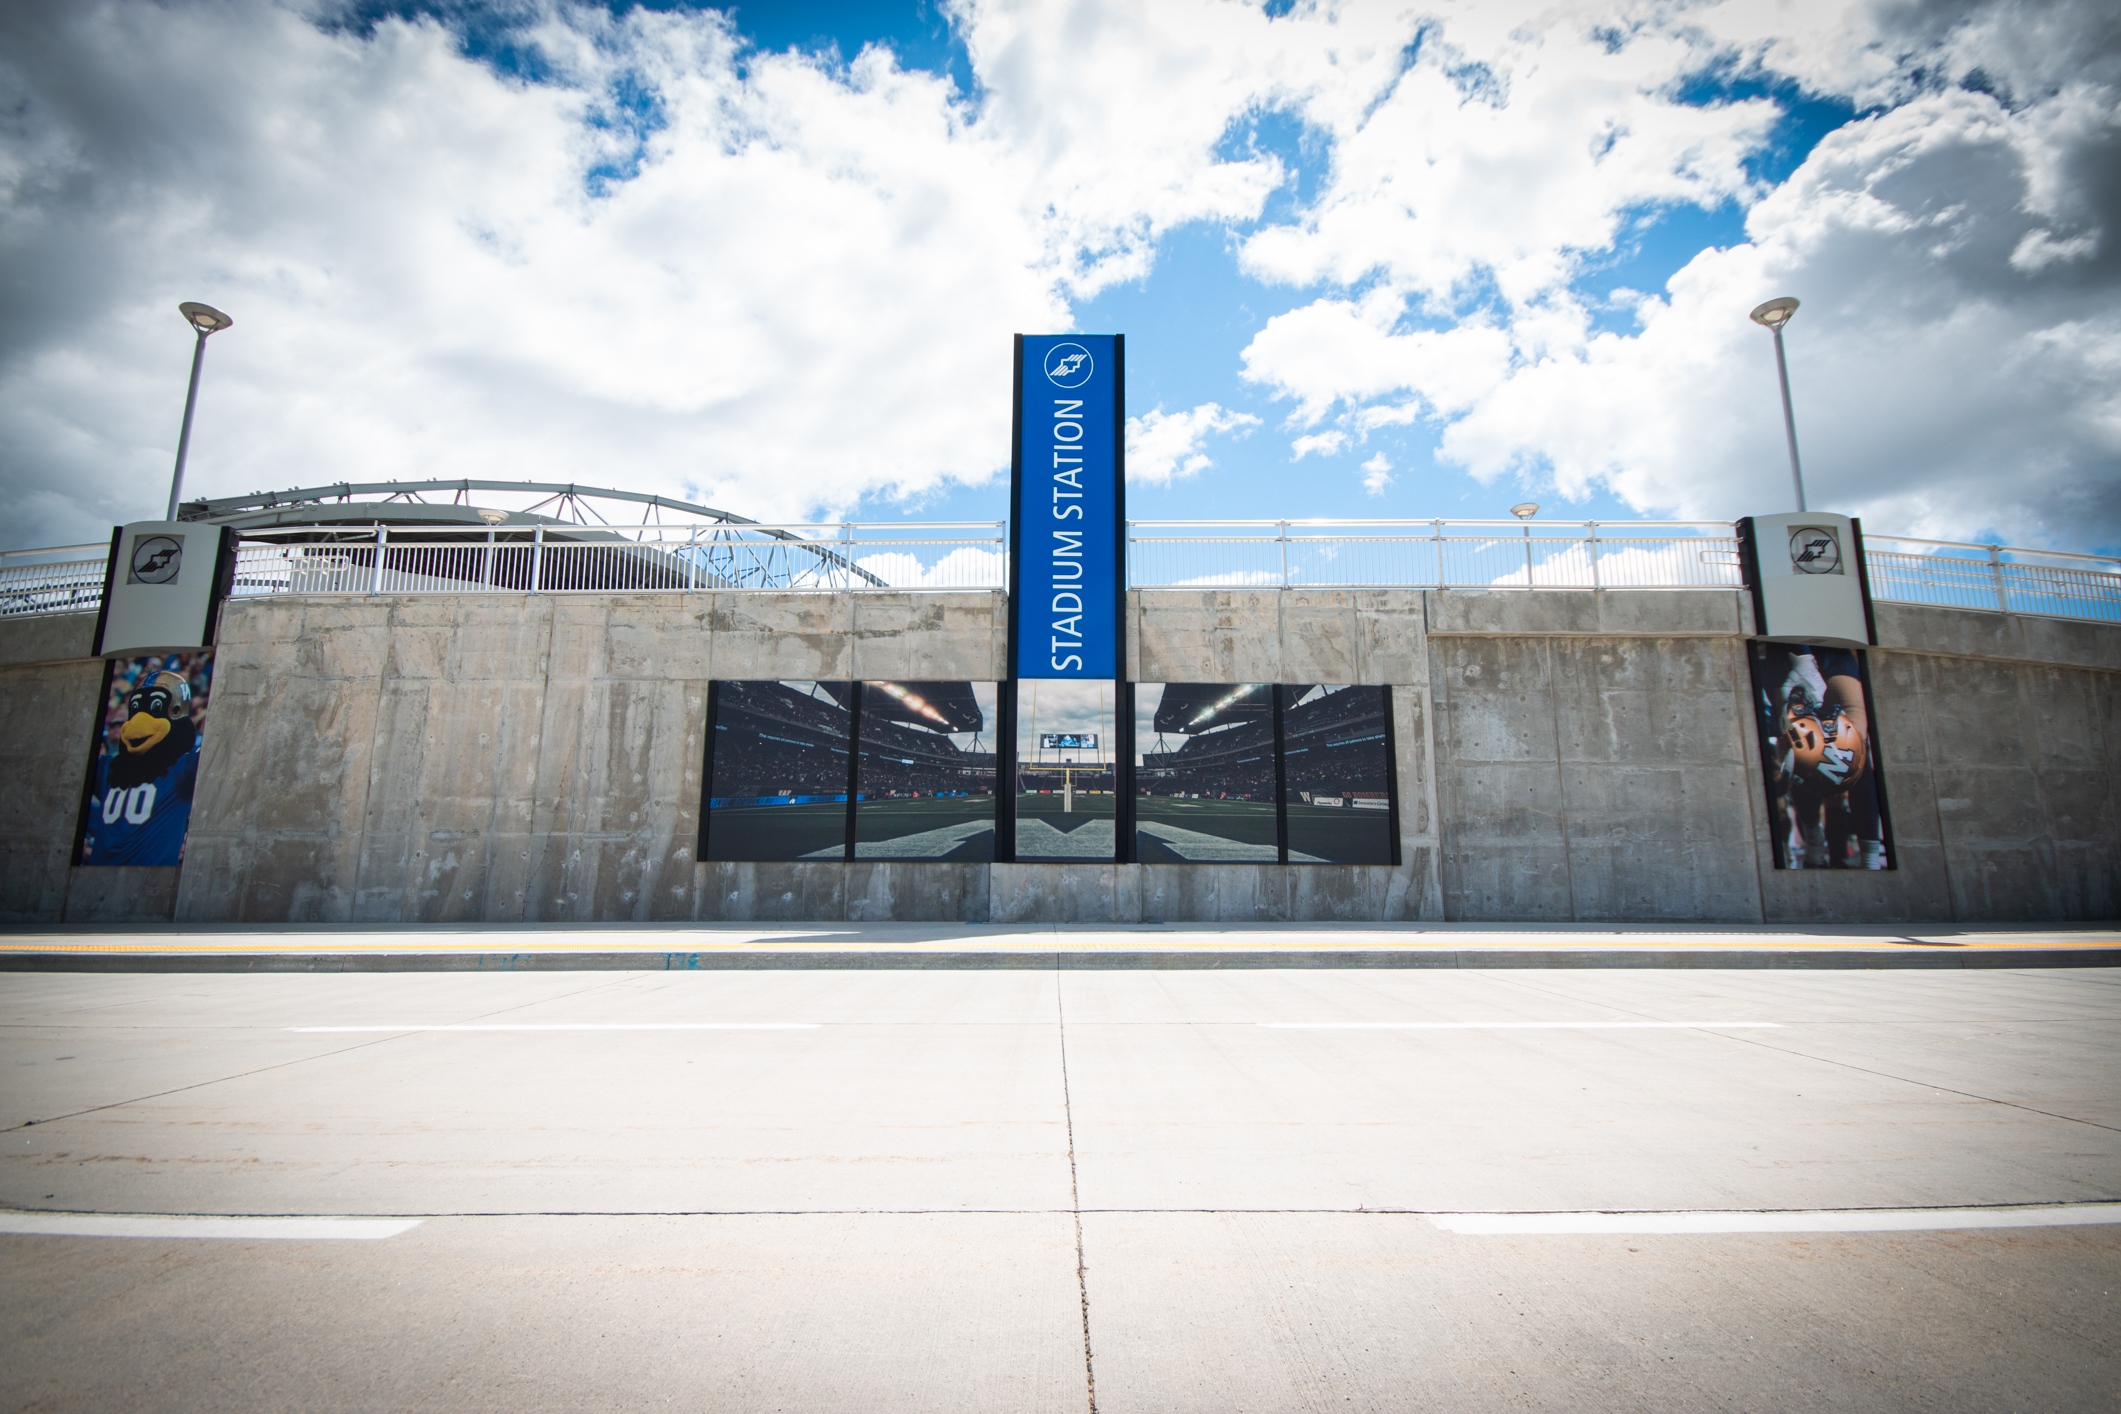 A trio of images taken during a Winnipeg Blue Bomber football game are displayed on a concrete wall